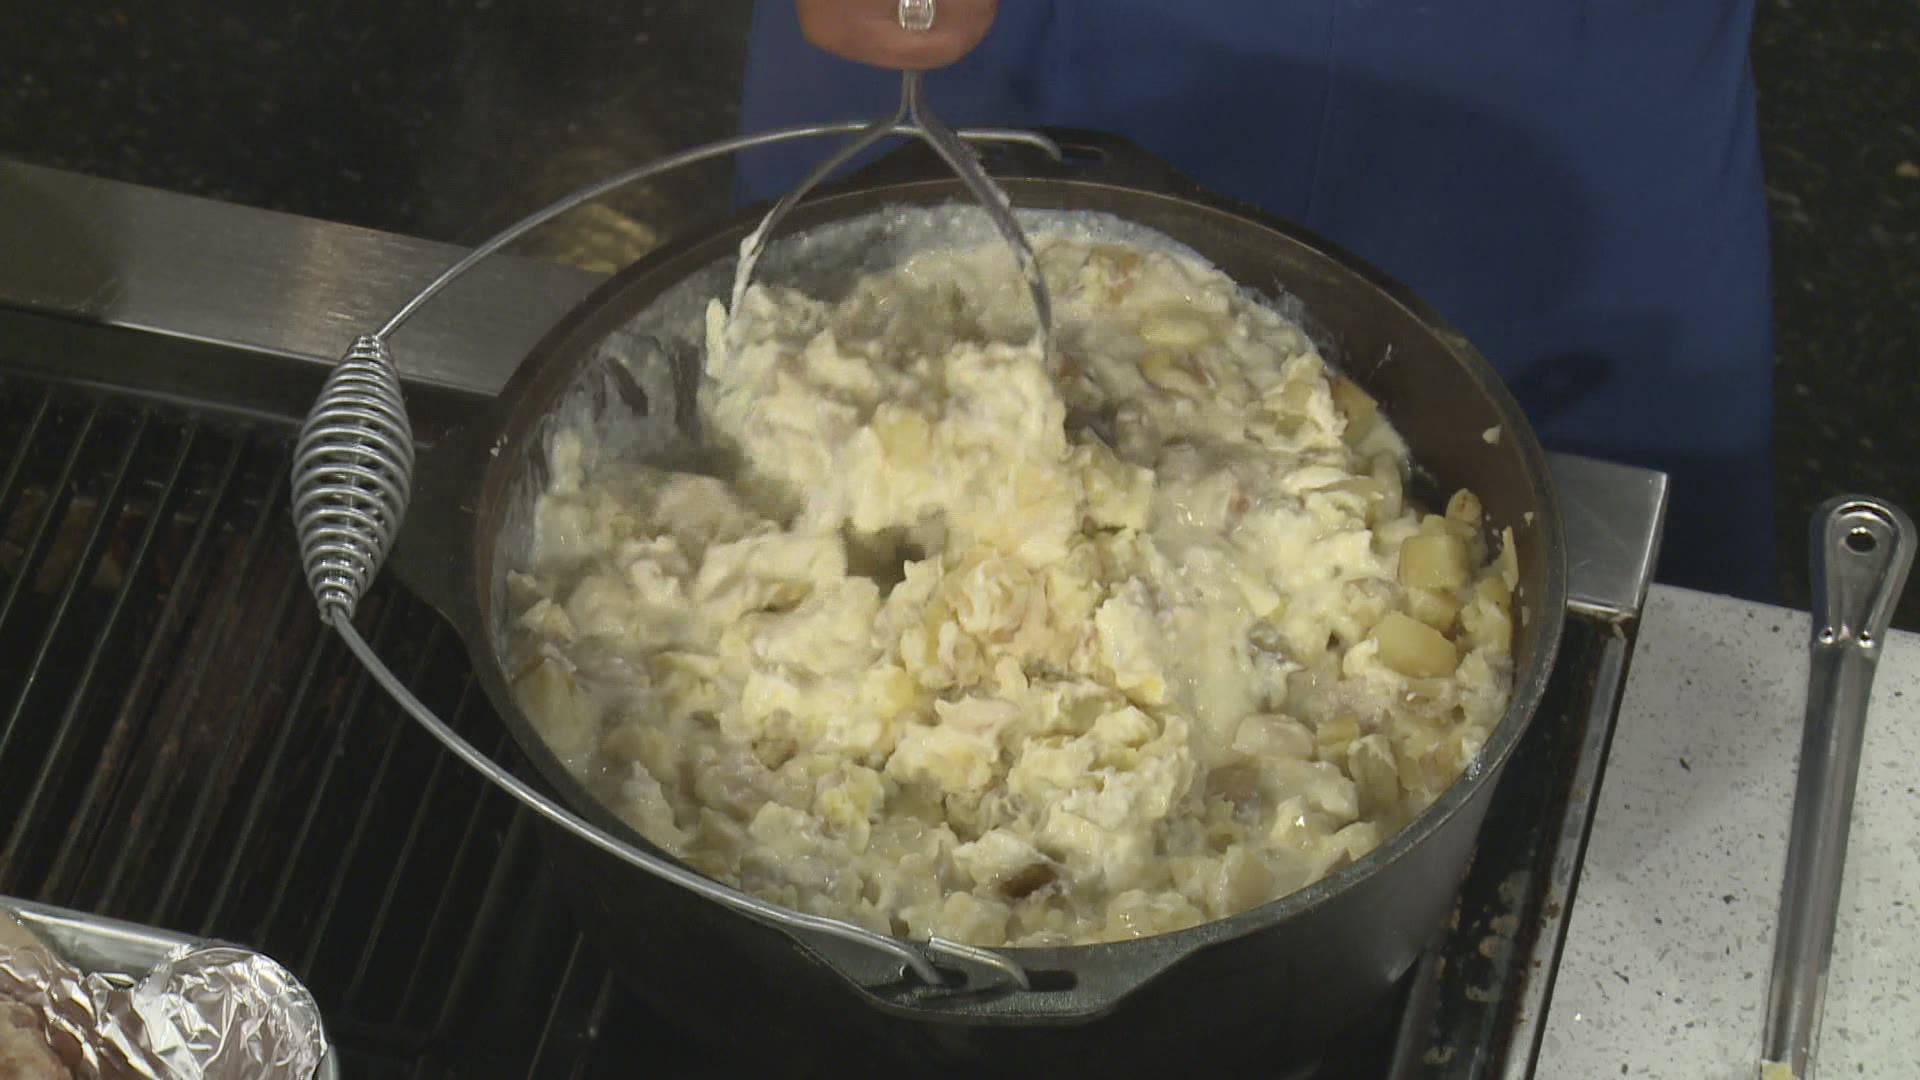 Chef Kevin Belton was cooking comfort food Tuesday - hamburger steaks with gravy and garlic mashed potatoes.